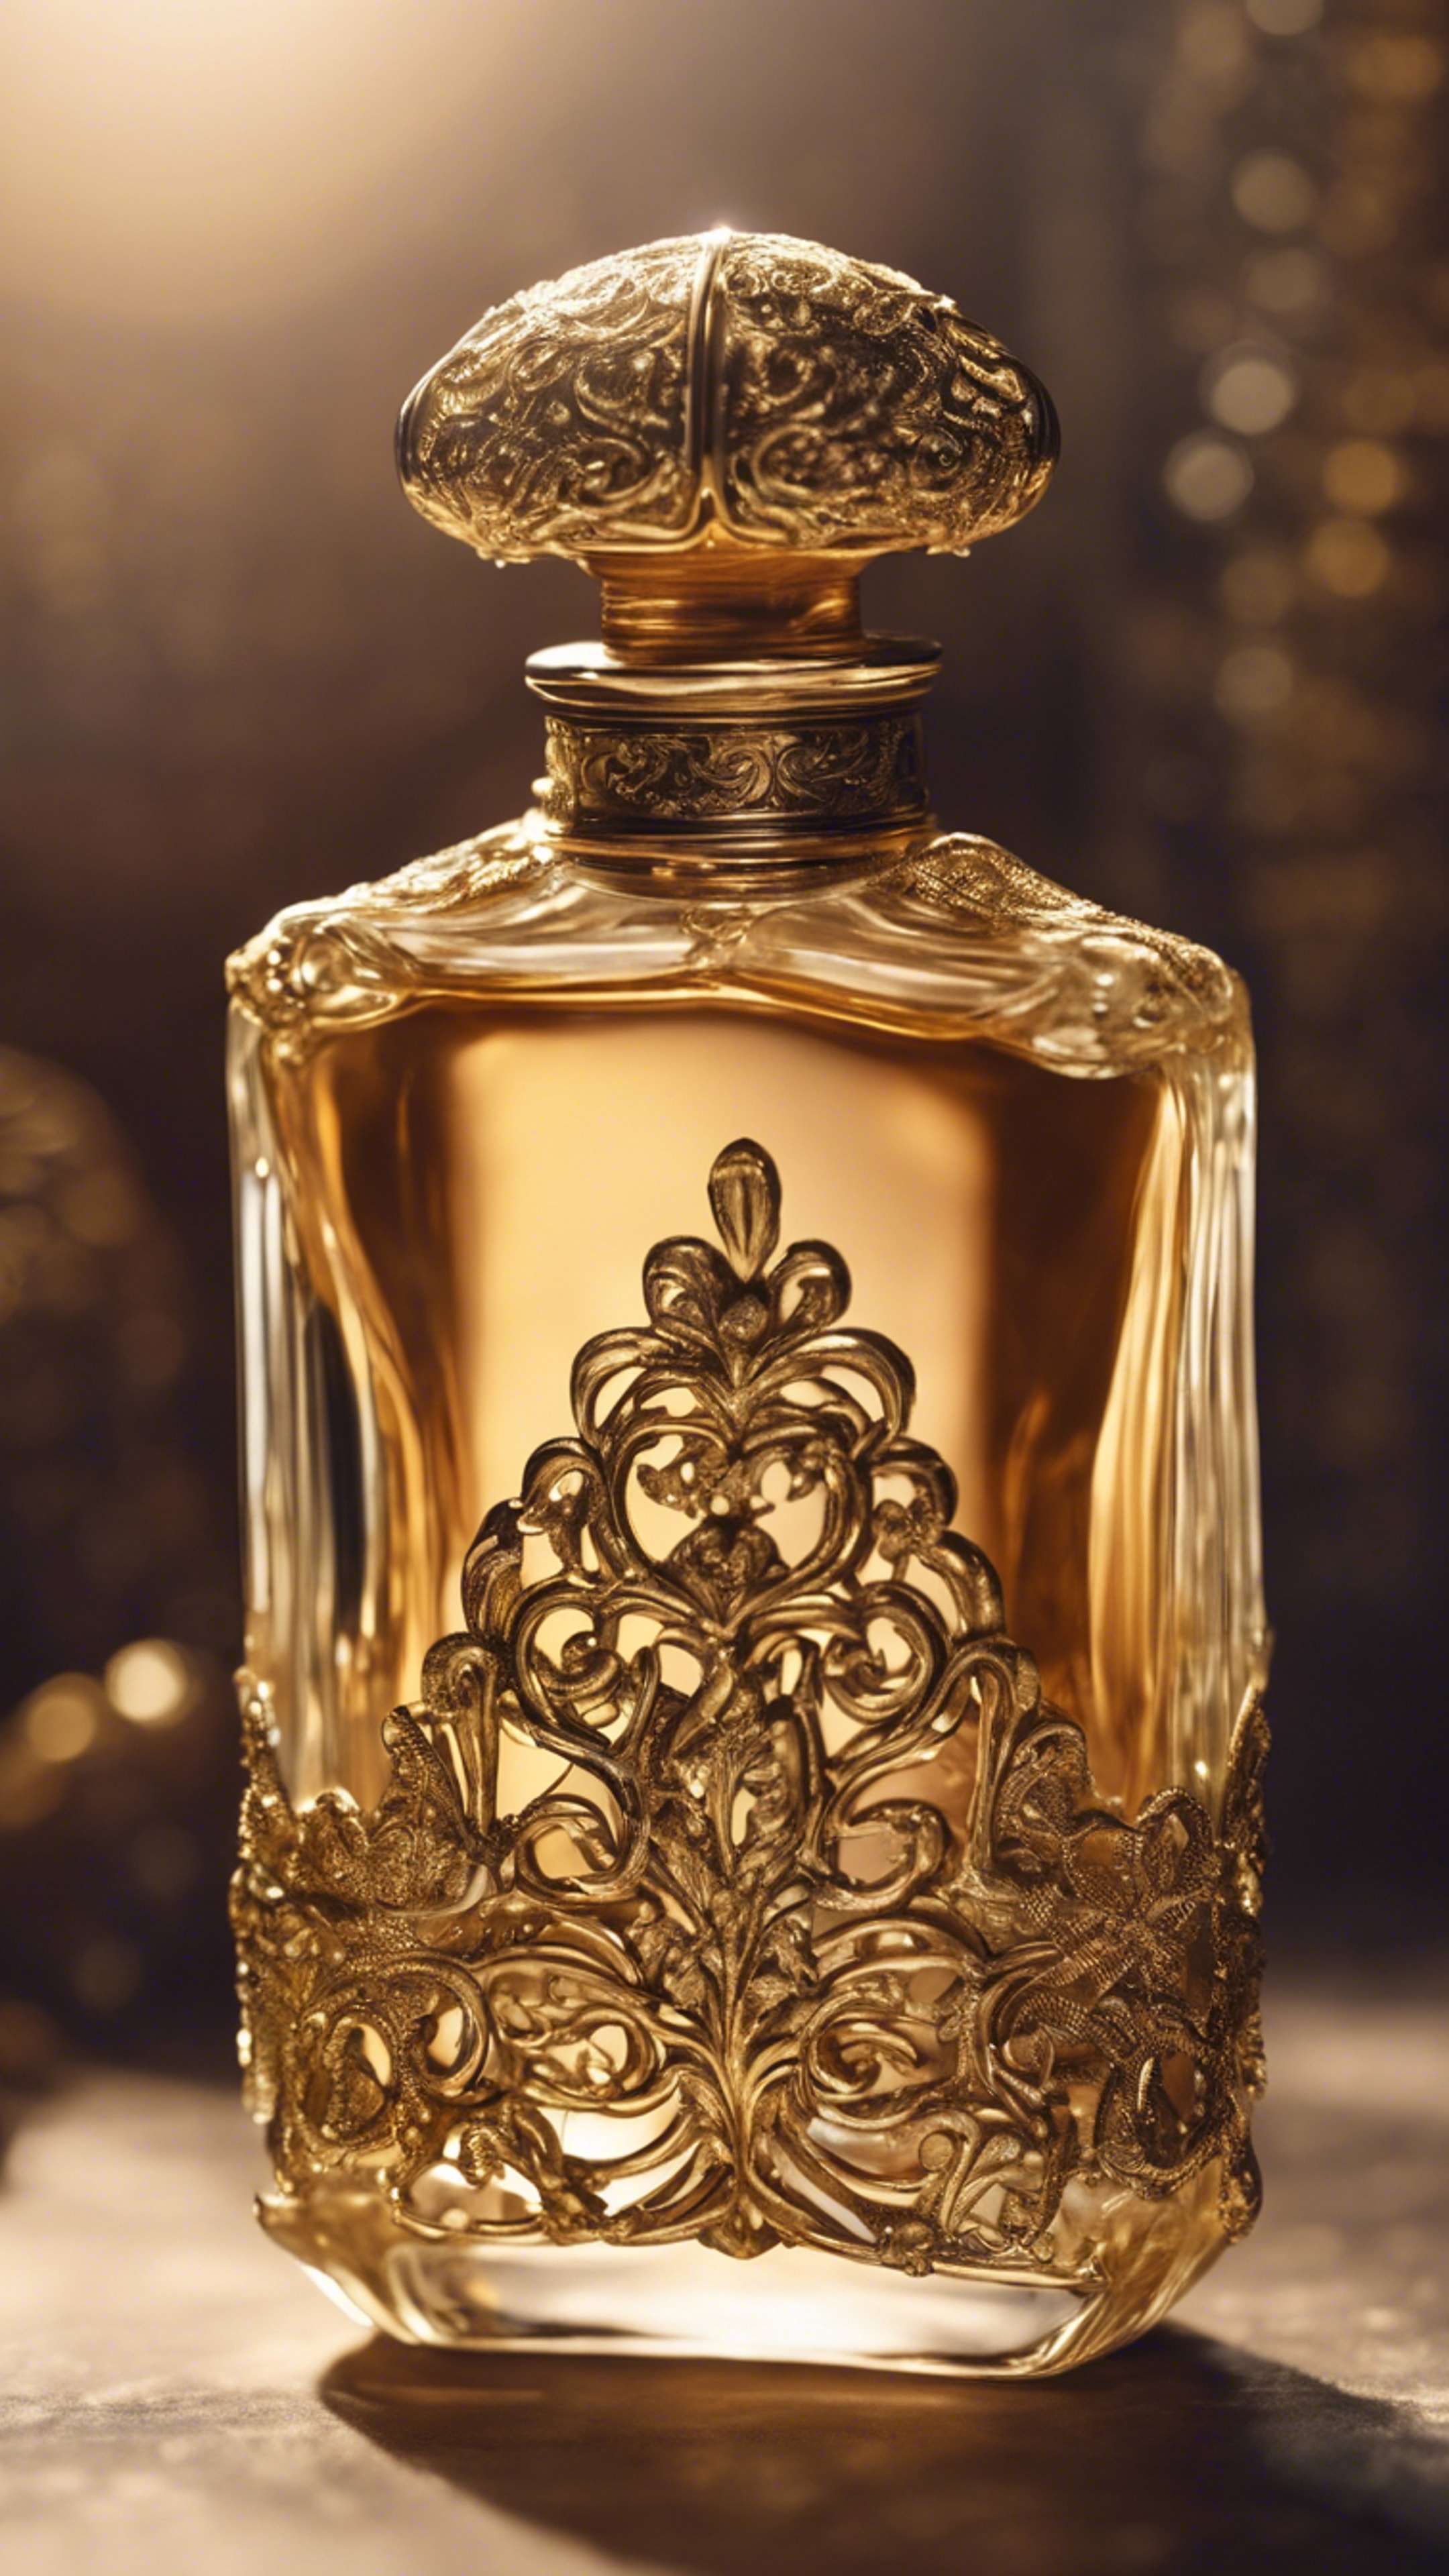 An antique perfume bottle with delicate gold filigree luxury cosmetic item. Tapeta[fe361f22190a4891a6d9]